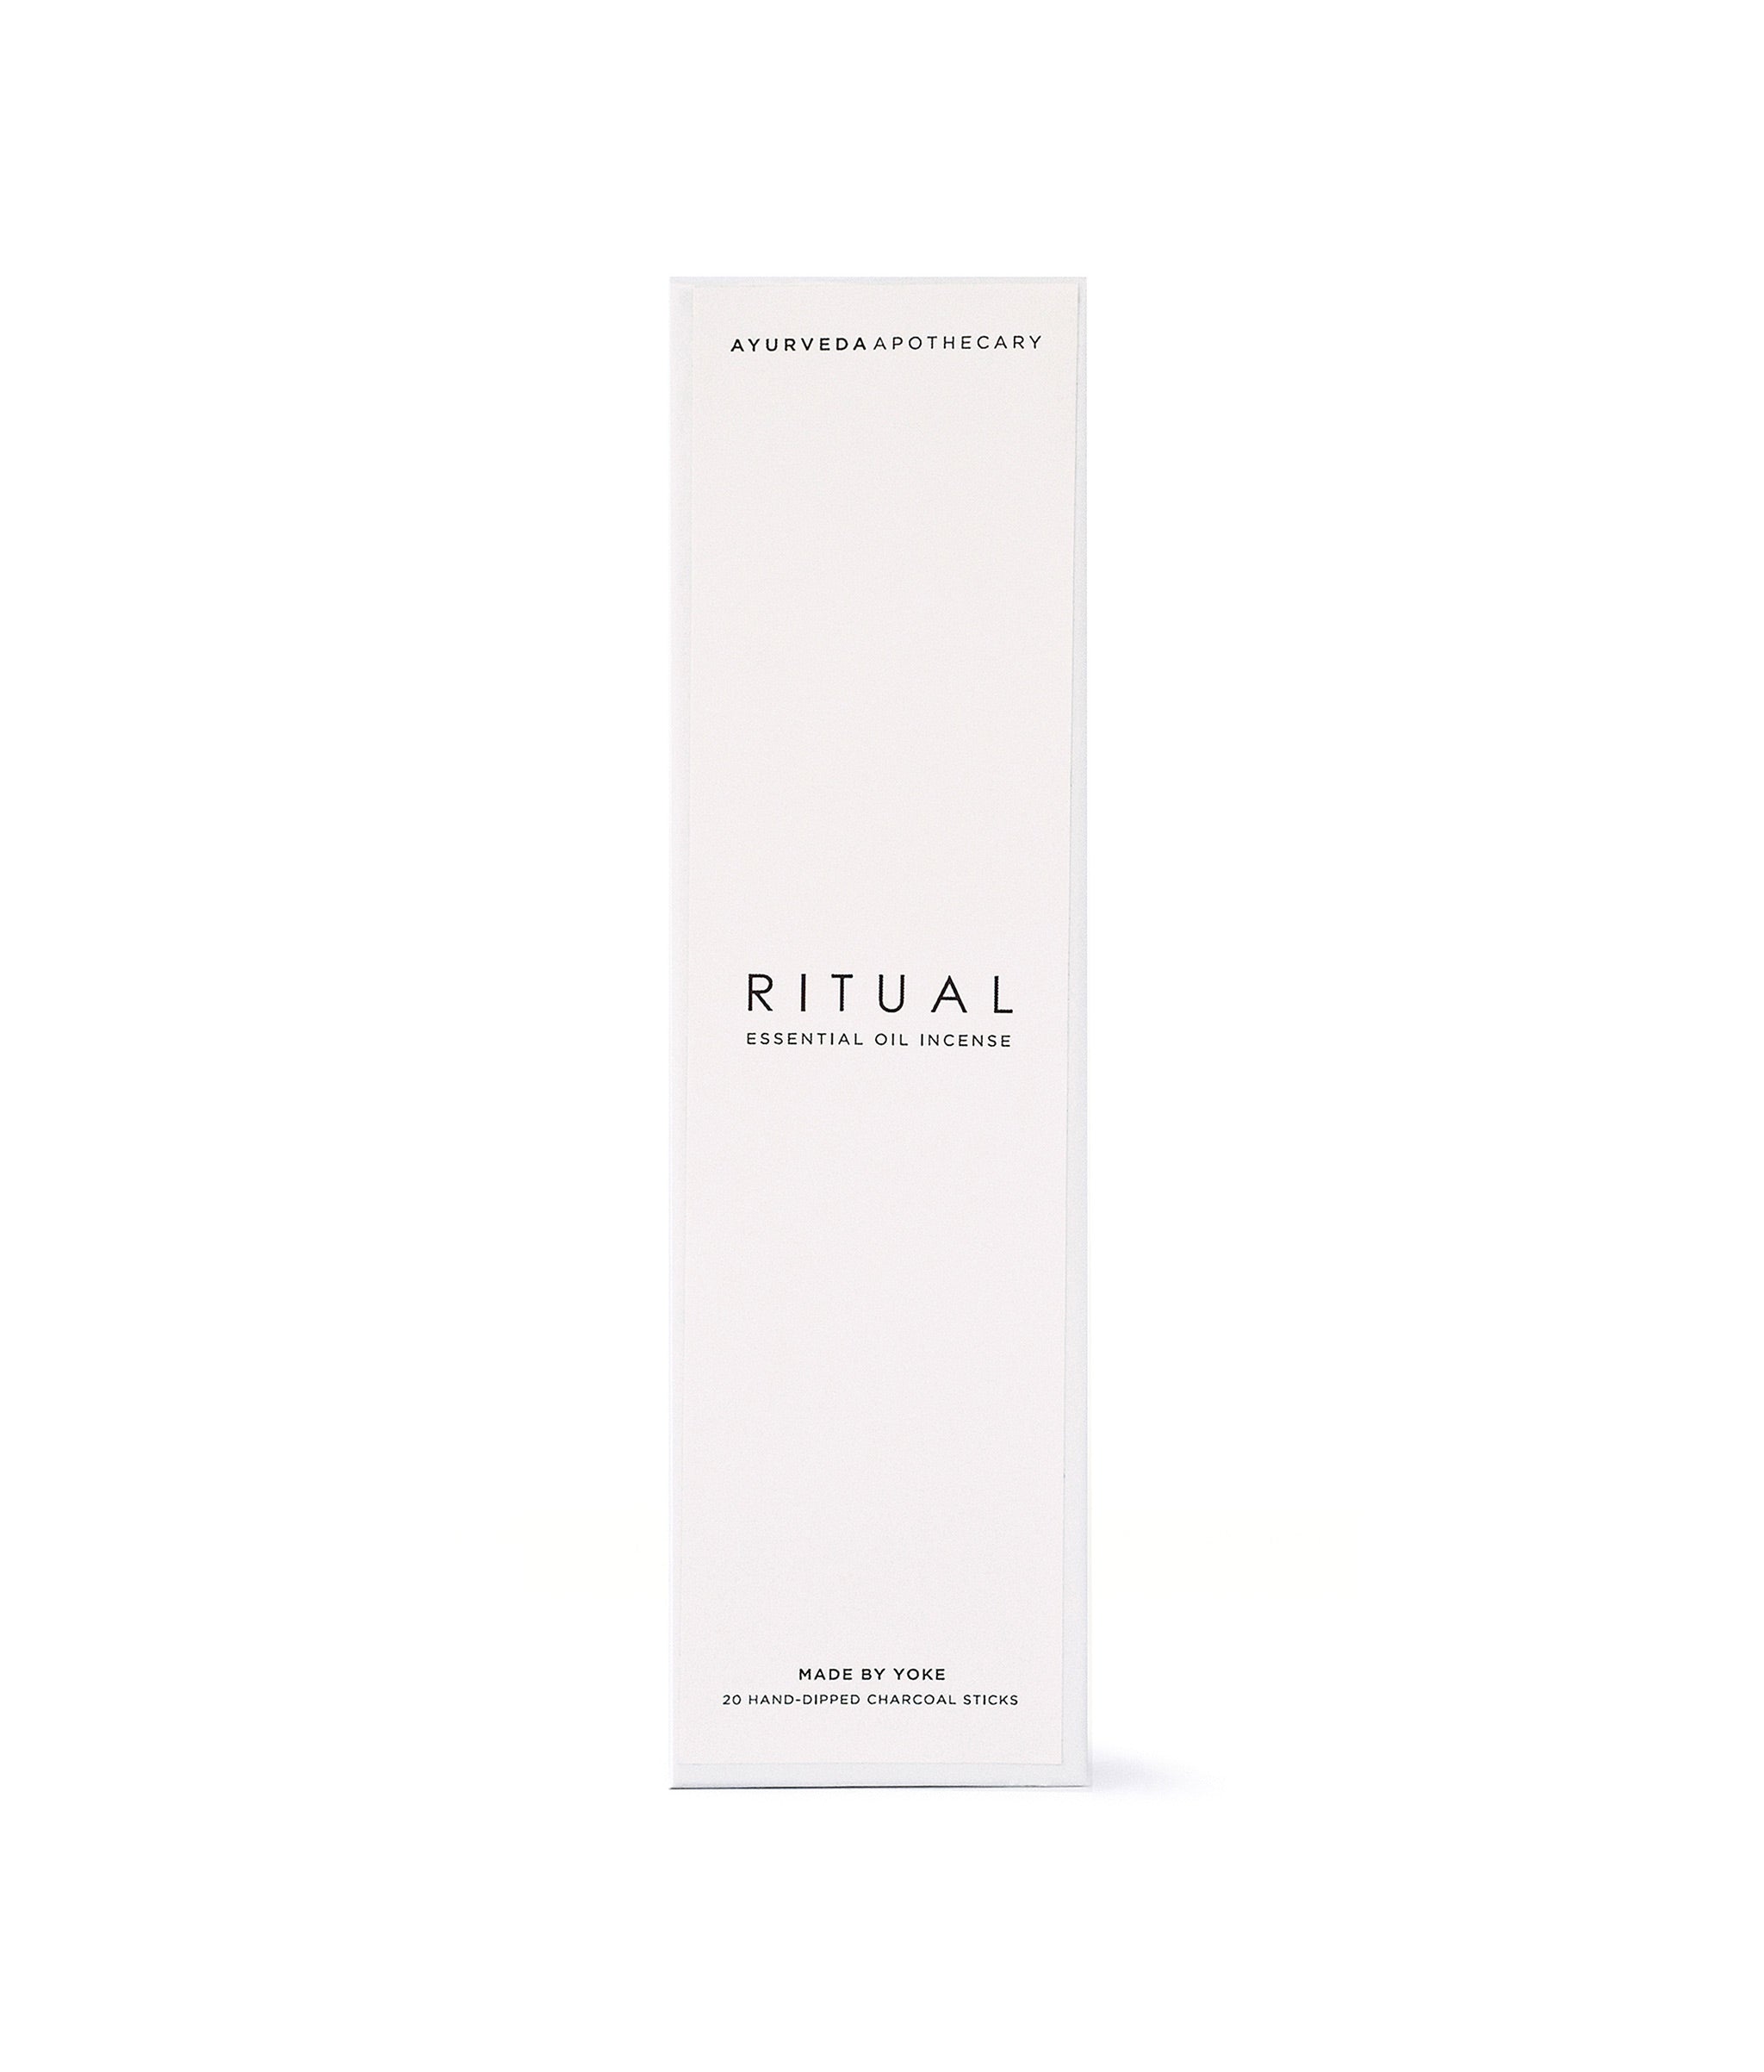 White box with black lettering, of Ritual Essential Oil Incense.